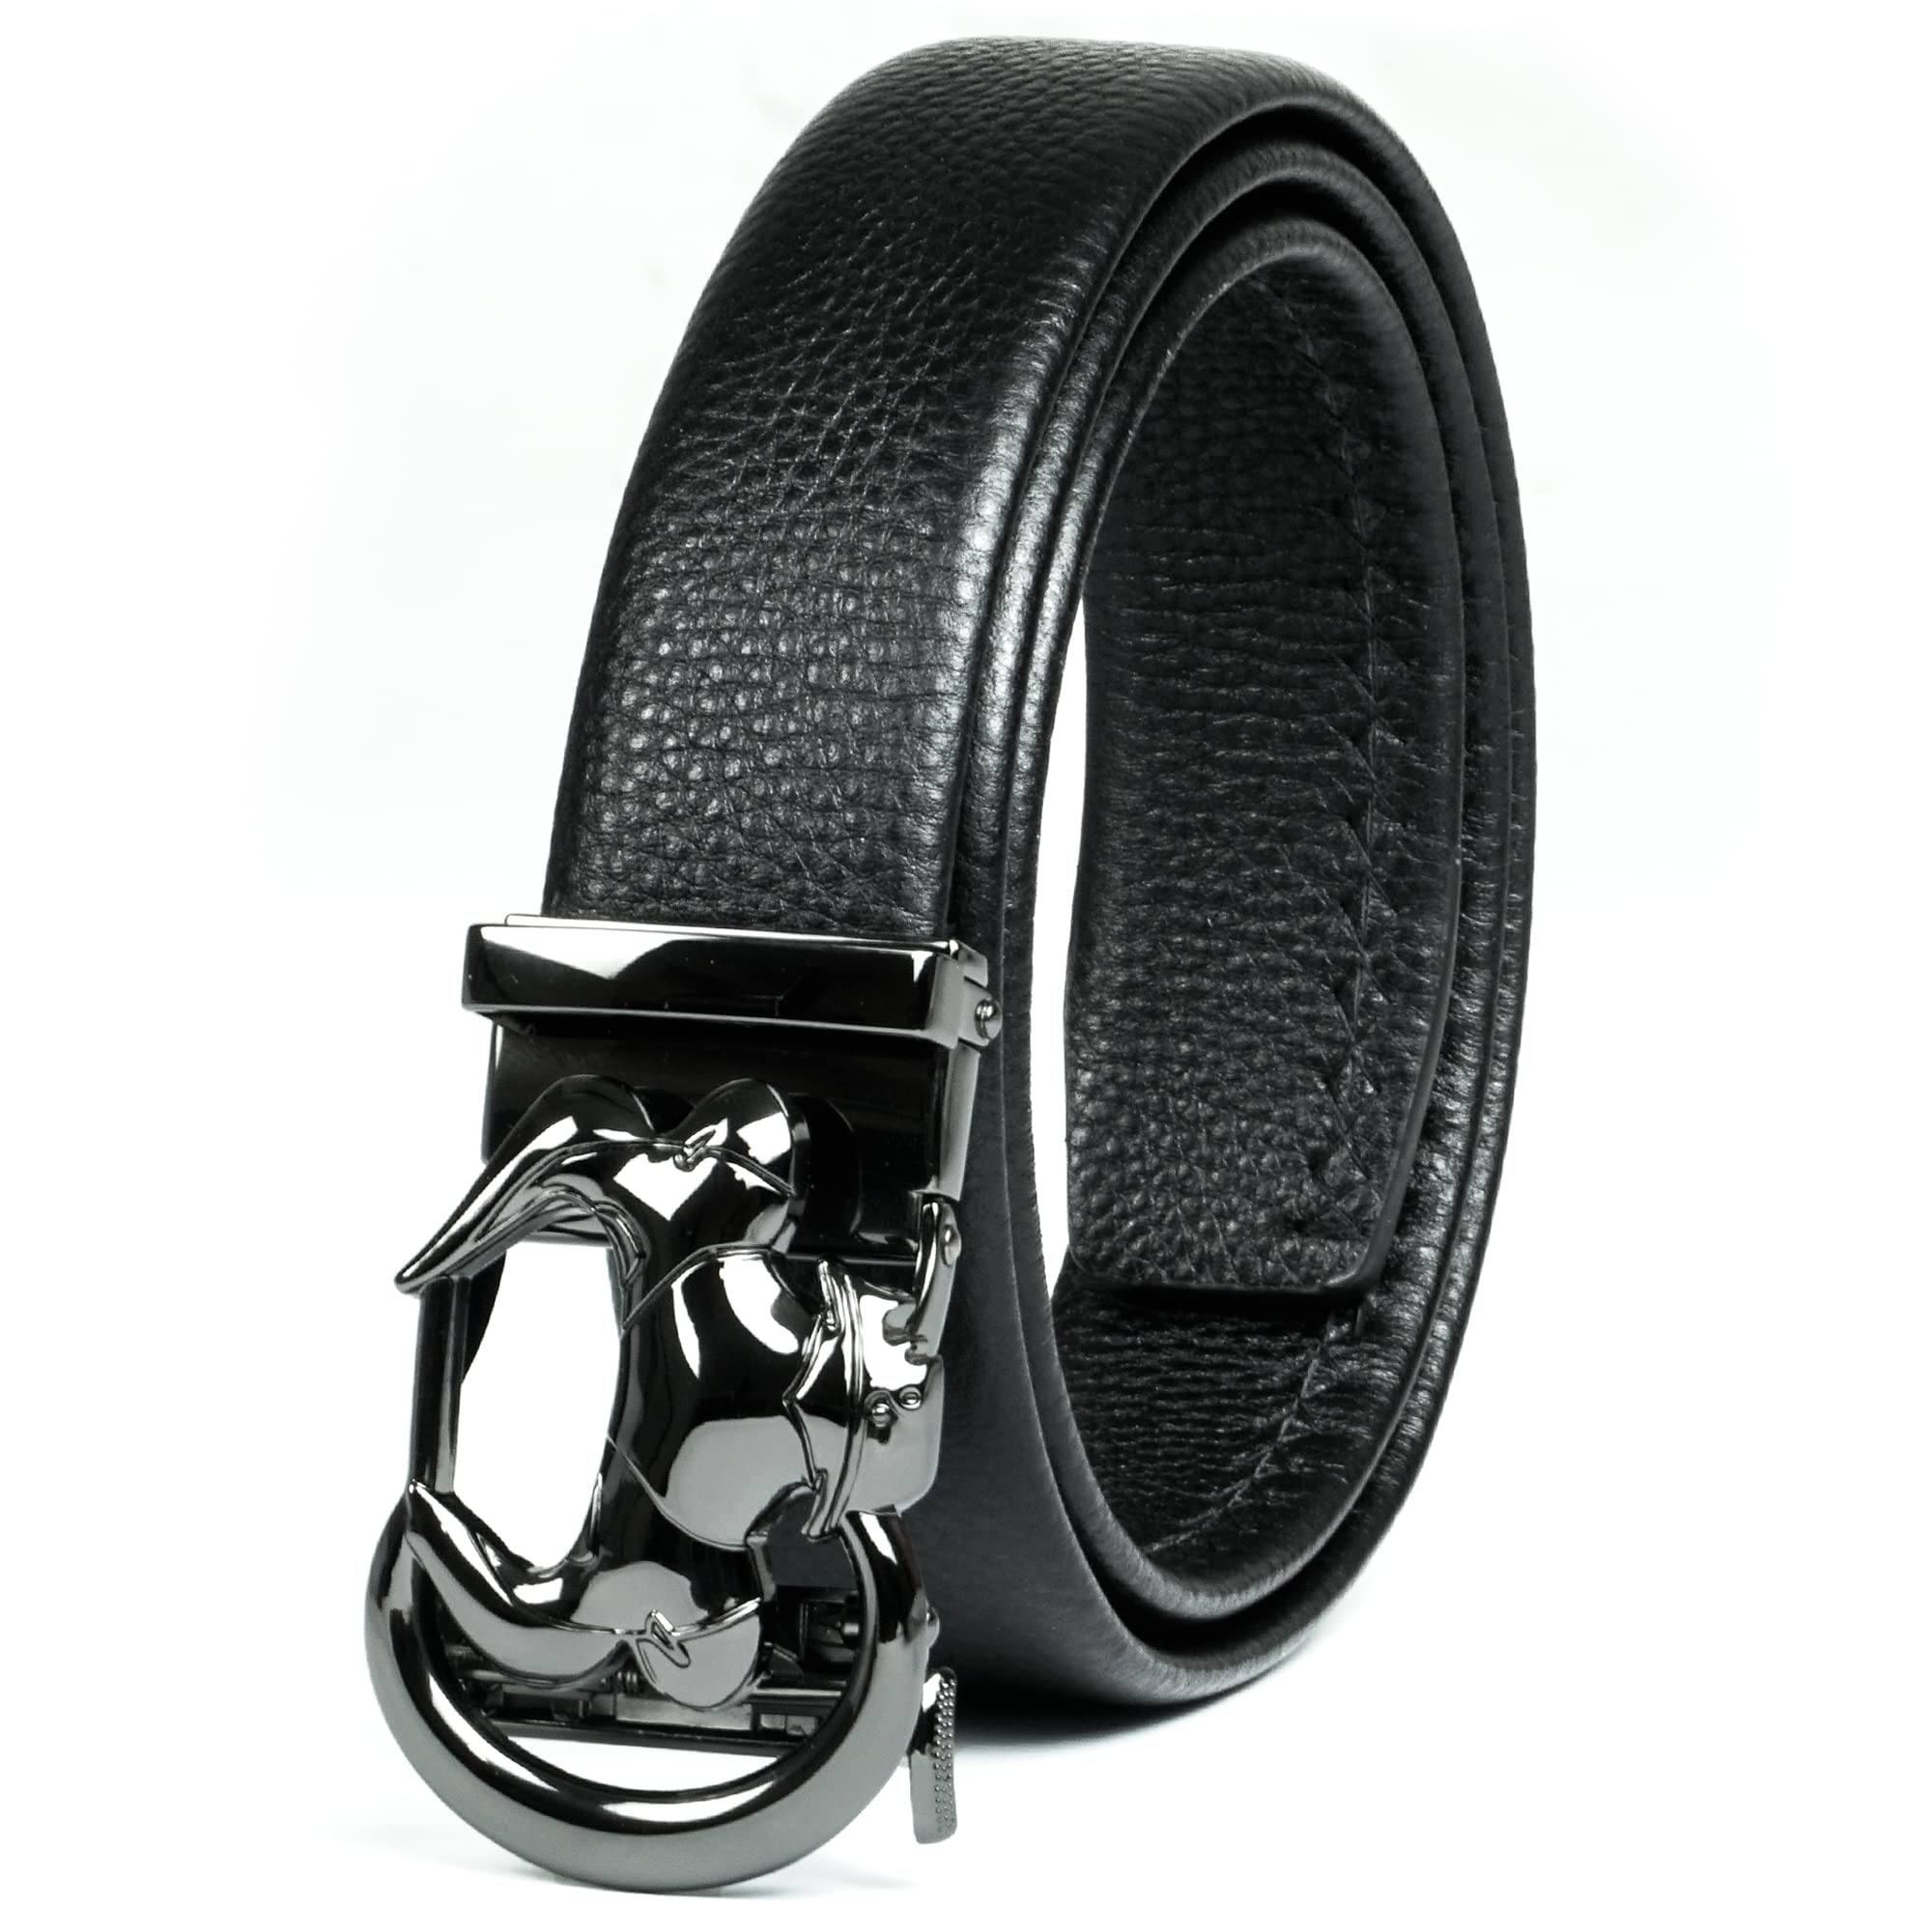 Shop Men's Ratchet Belt with Real Leather - Coipdfty